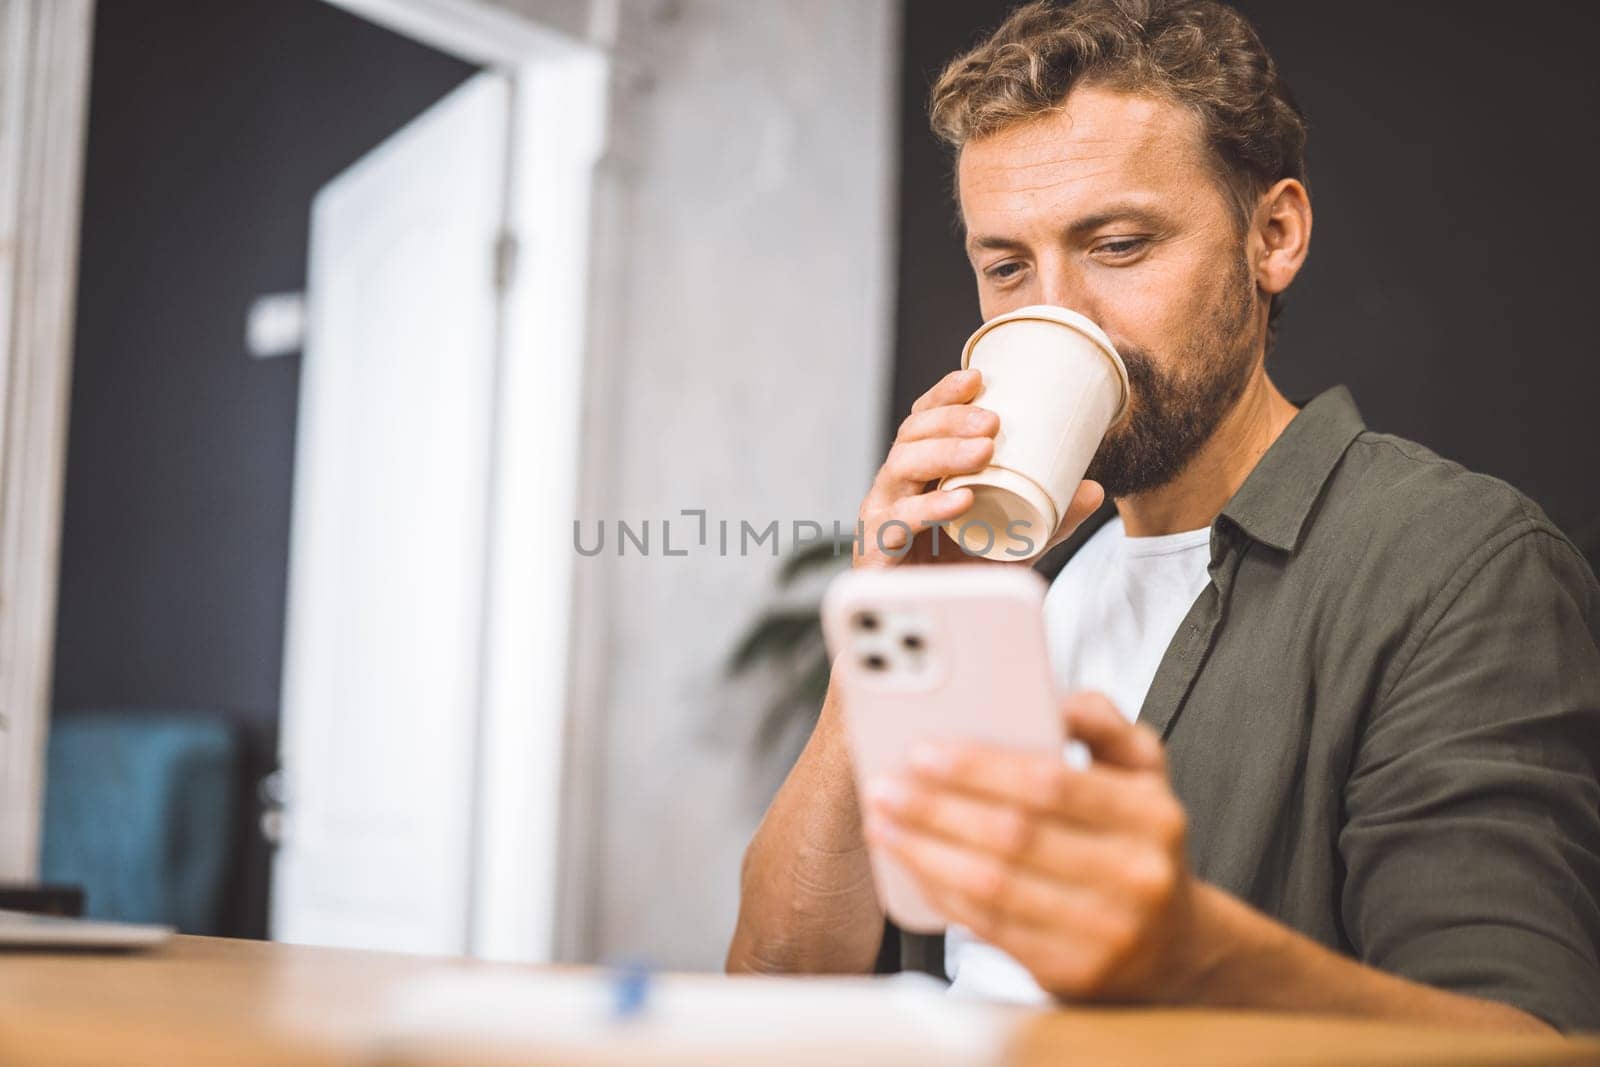 Copywriter focusing on their phone while enjoying cup of coffee home. Concept of working from home is emphasized here, highlighting freedom and flexibility that comes with being self-employed freelancer. High quality photo